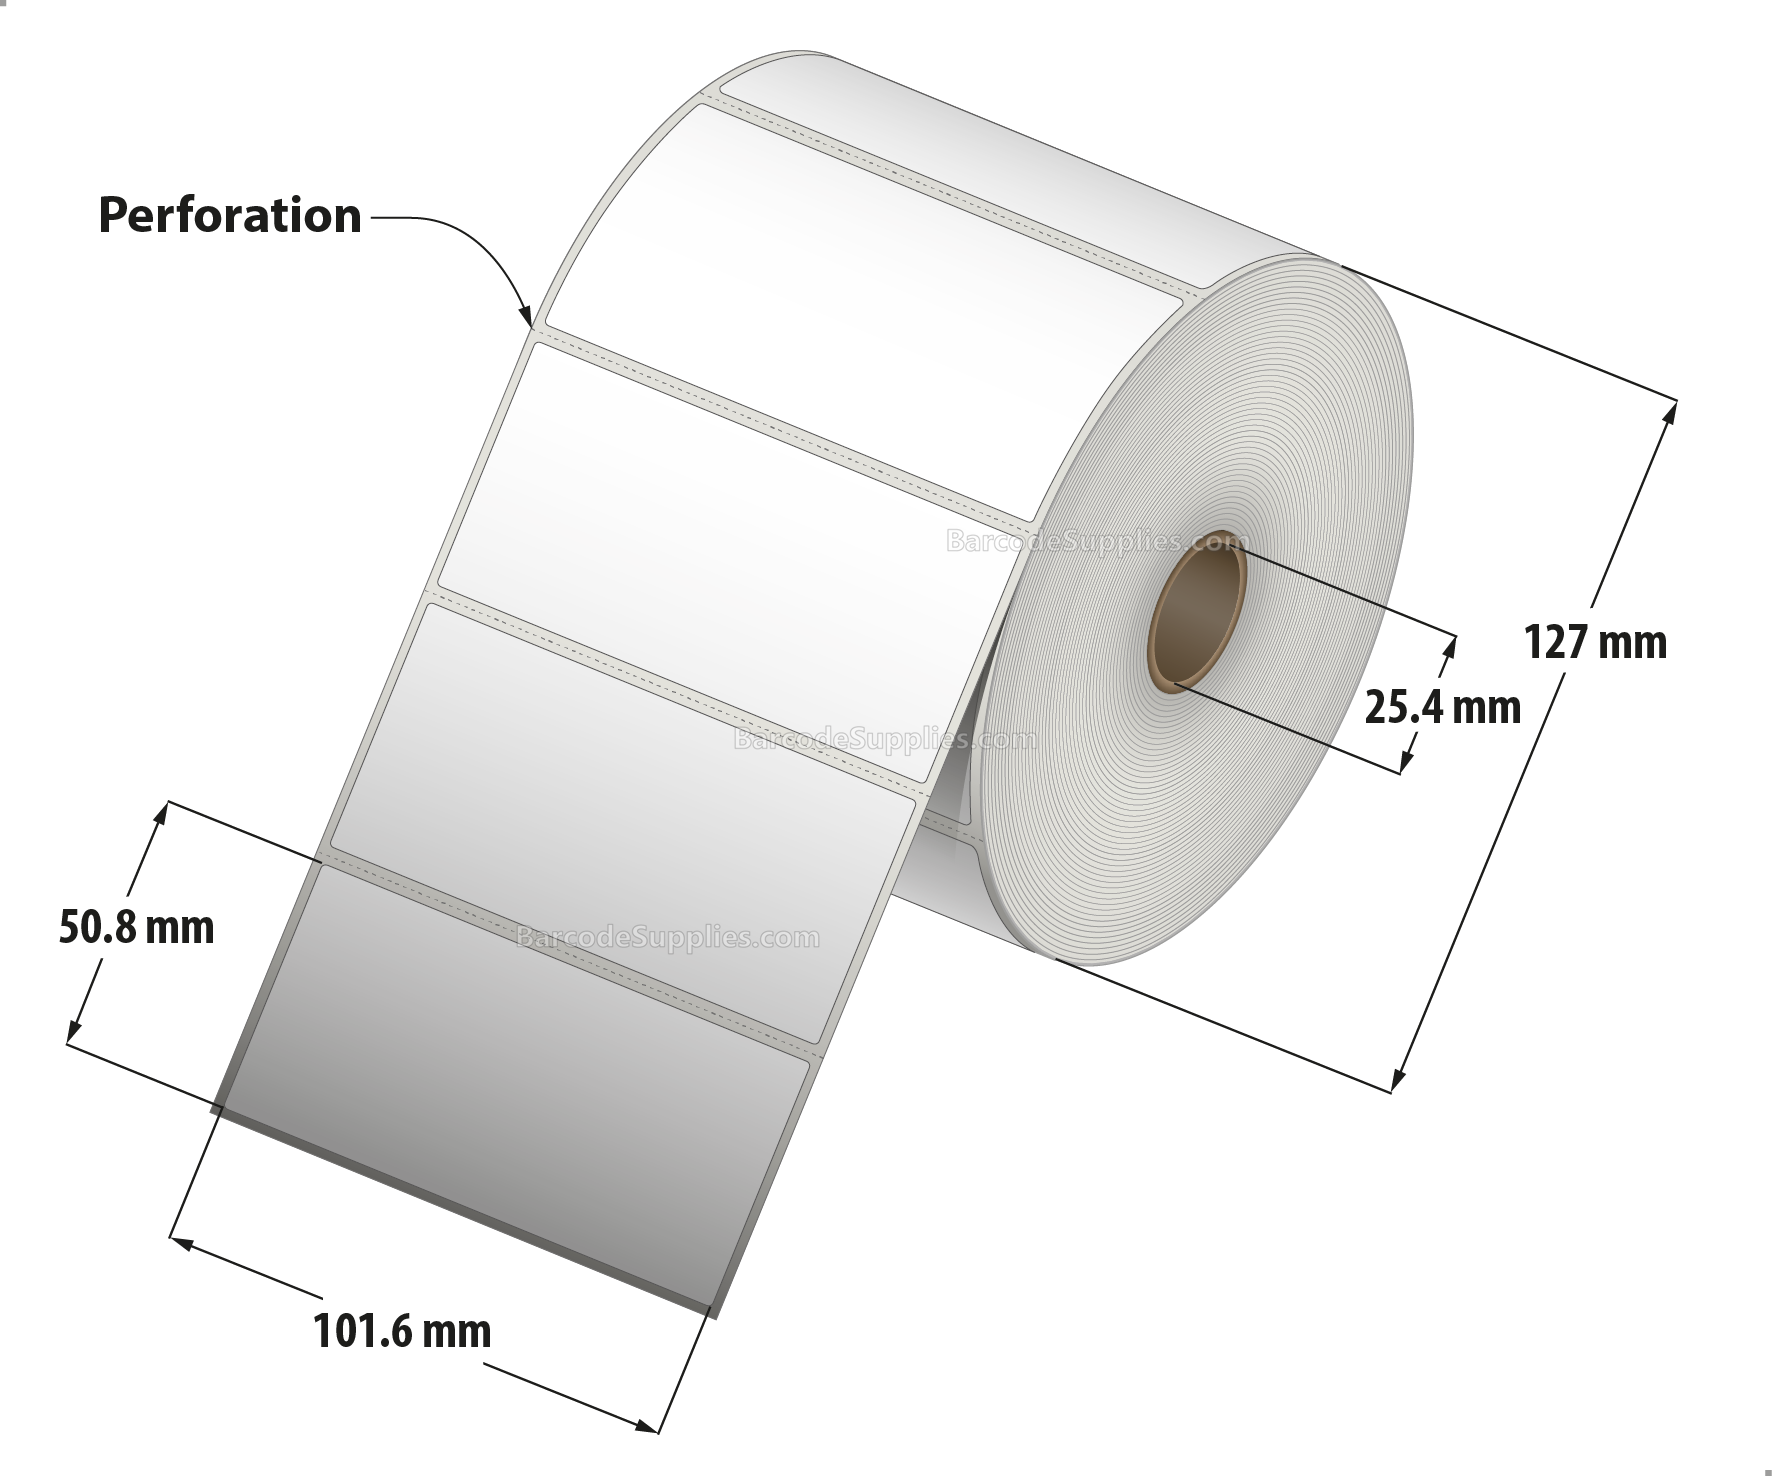 4 x 2 Direct Thermal White Labels With Rubber Adhesive - Perforated - 1240 Labels Per Roll - Carton Of 12 Rolls - 14880 Labels Total - MPN: RDT5-400200-1P